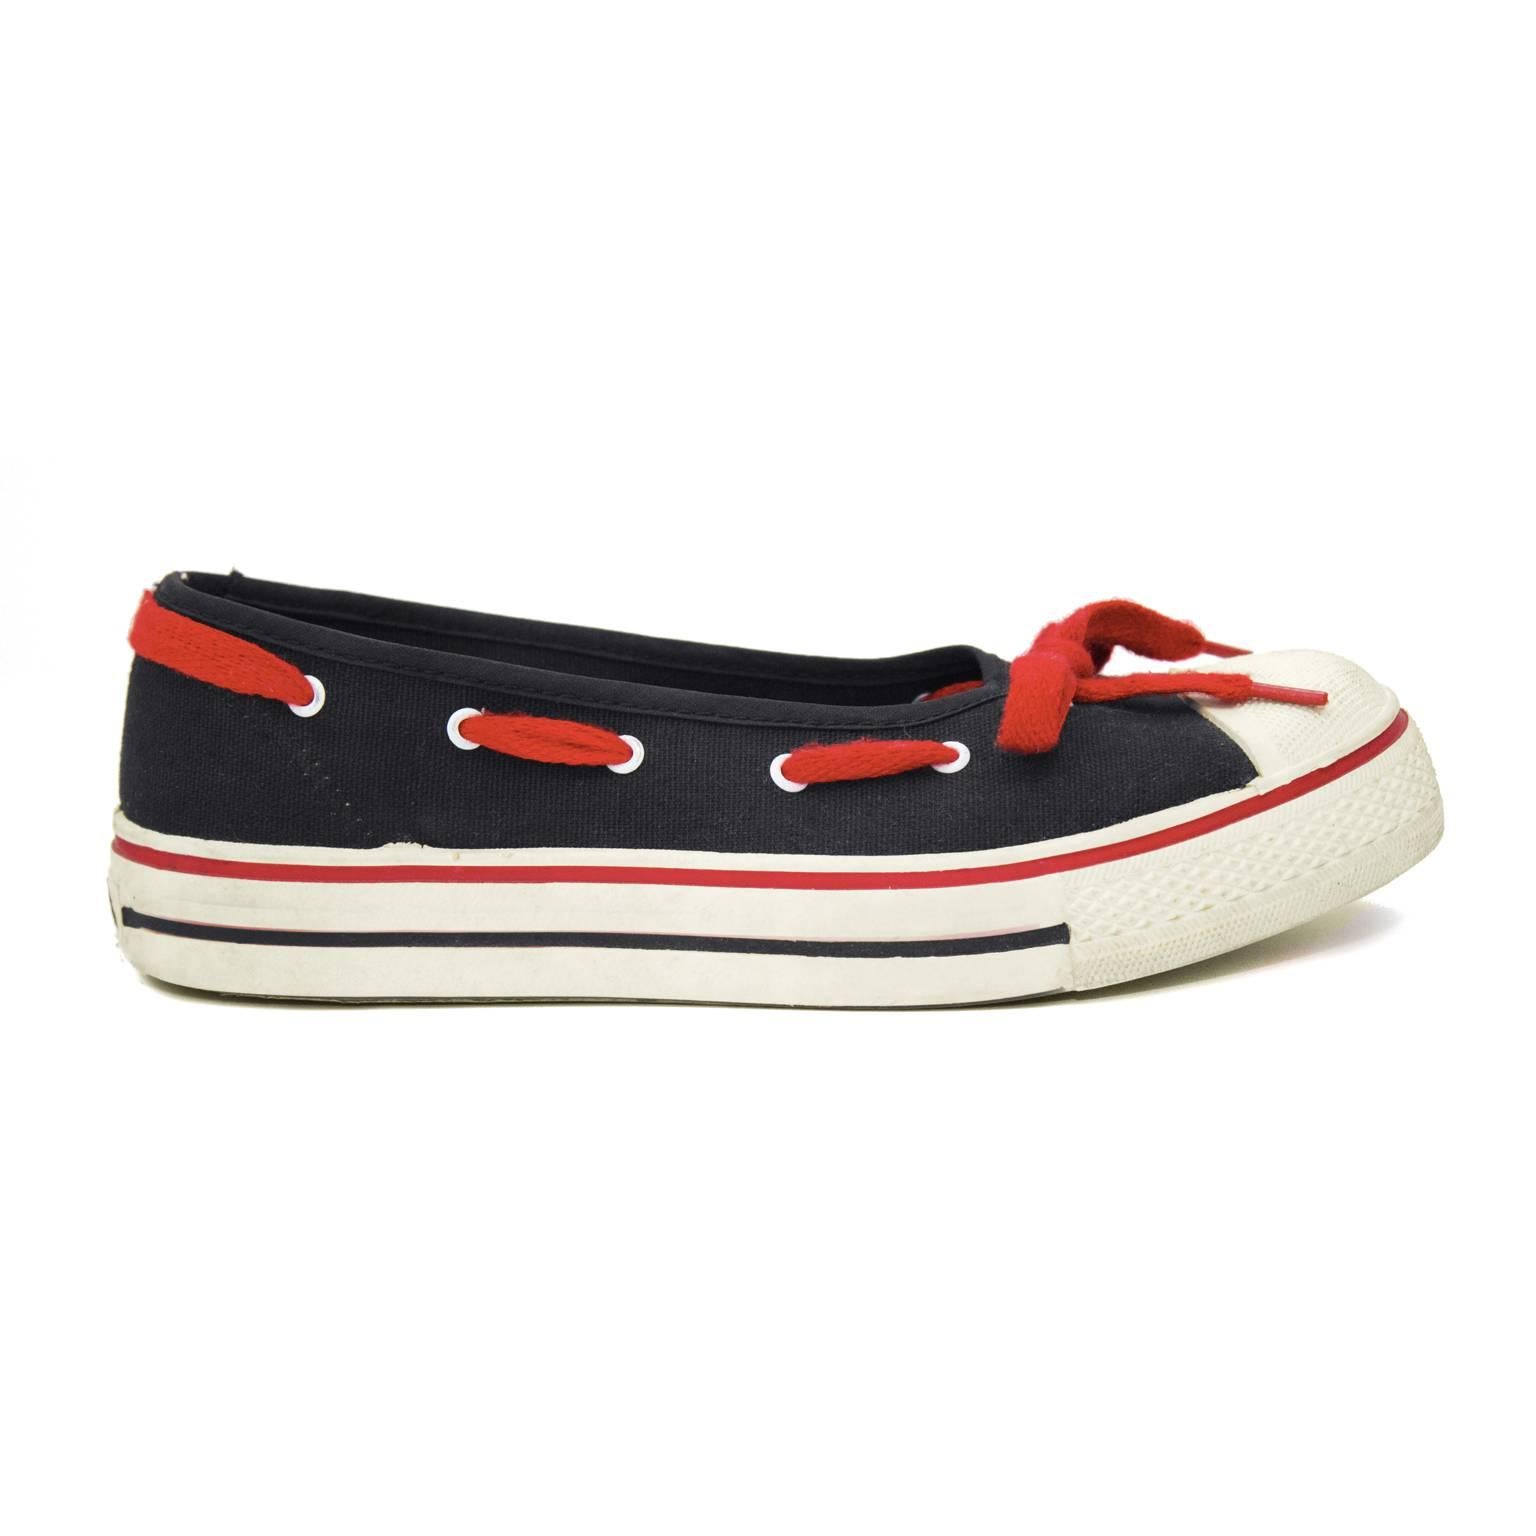 Very early pre OMO 1970's Norma Kamali black and white Converse inspired sneaker flats. From the same era as her iconic high heeled sneaker. White rubber soles and toe caps, black canvas body and red lacing detail around edge finishing in a bow. In